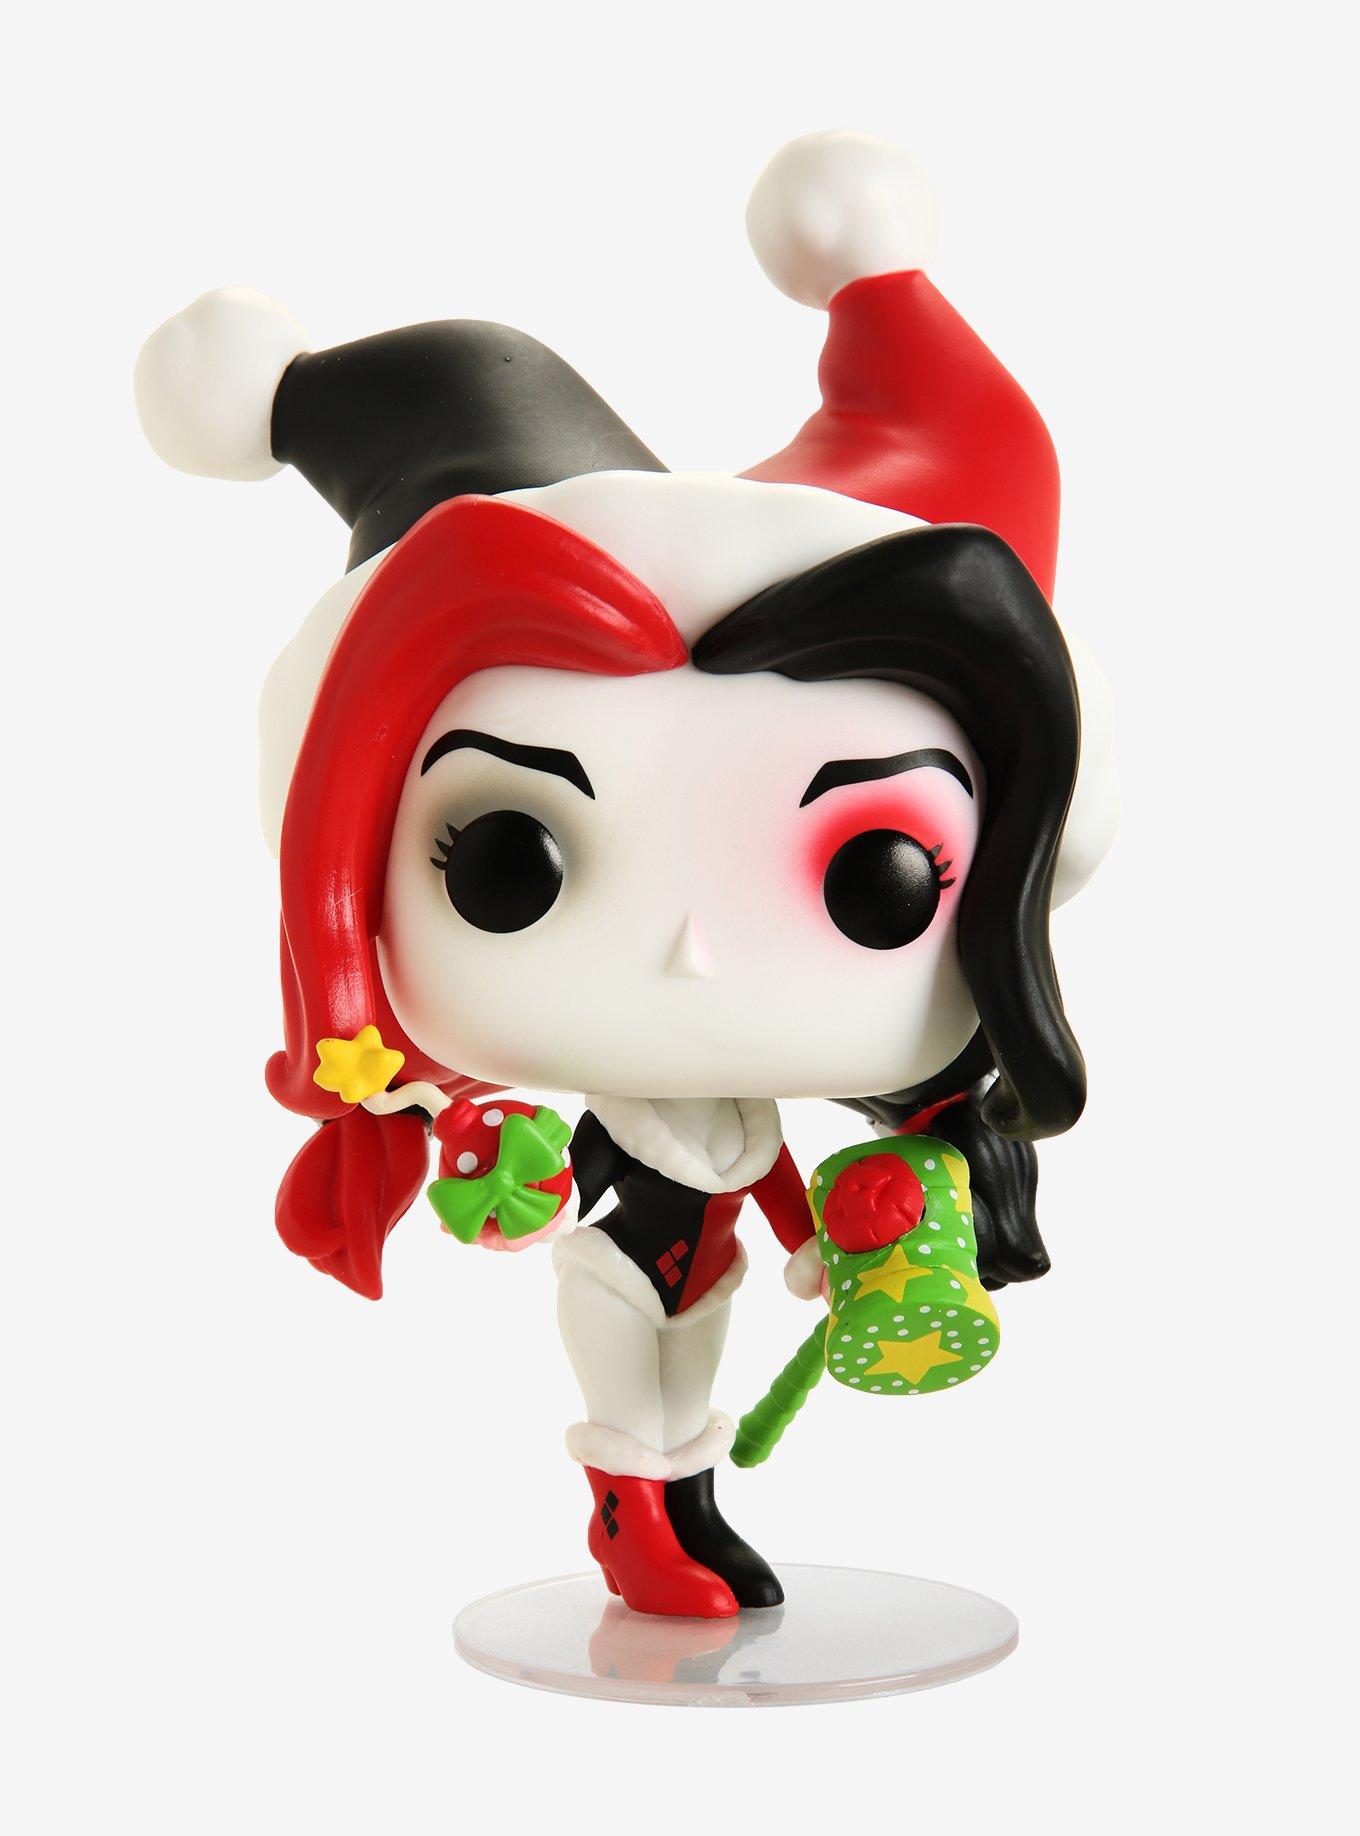 Funko Pop! Harley Quinn with mallet